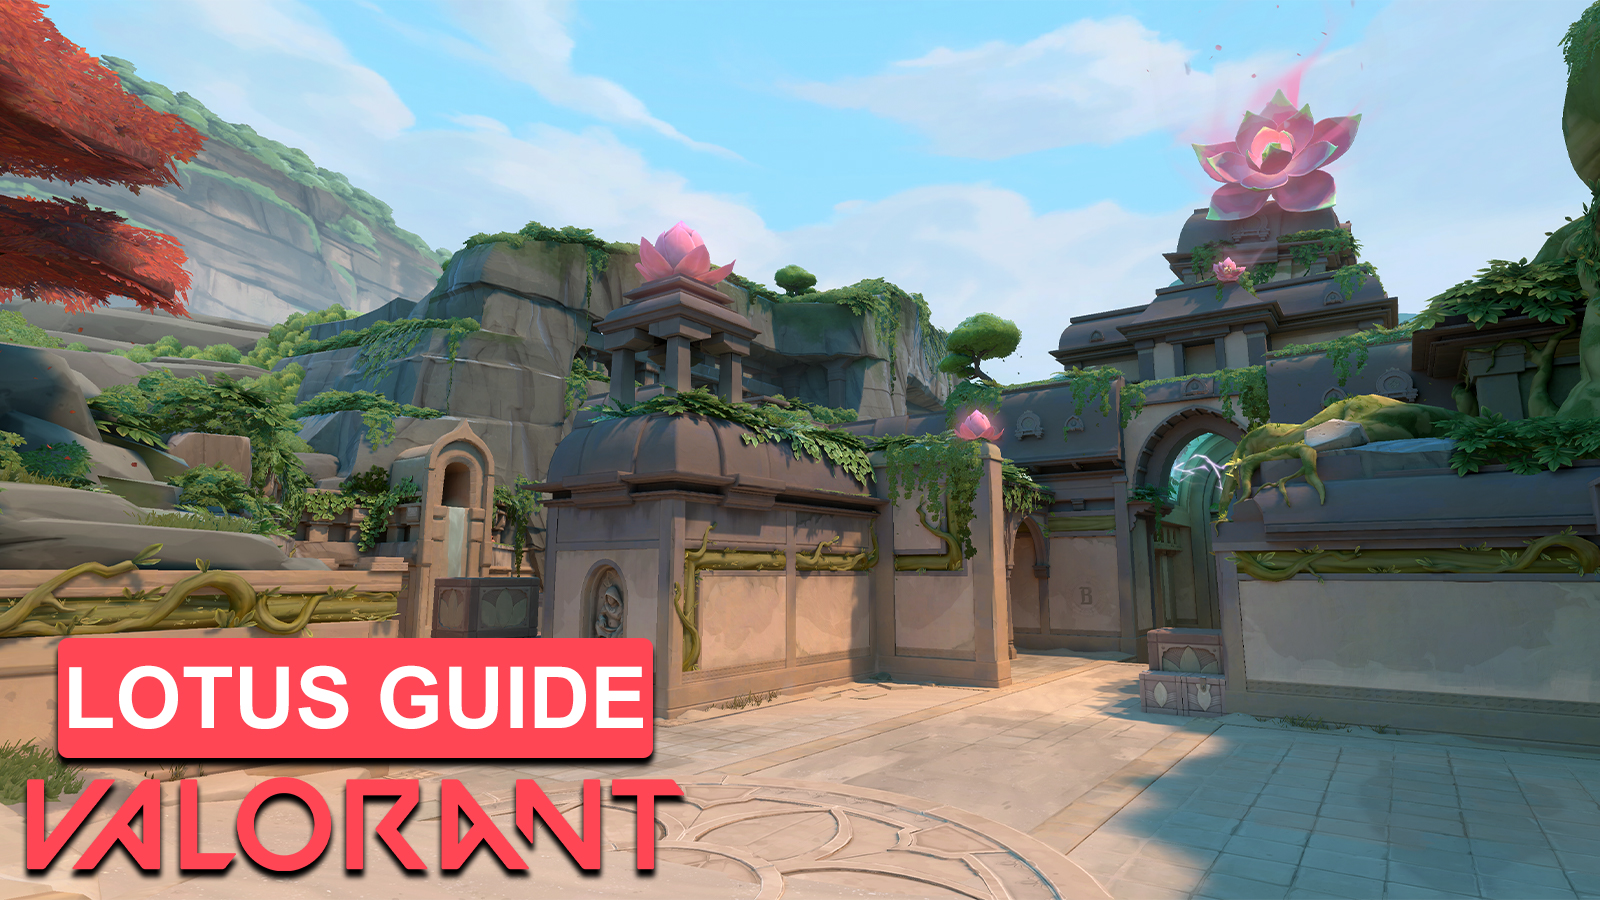 Valorant Split: Tips and Tricks To Dominate The Map